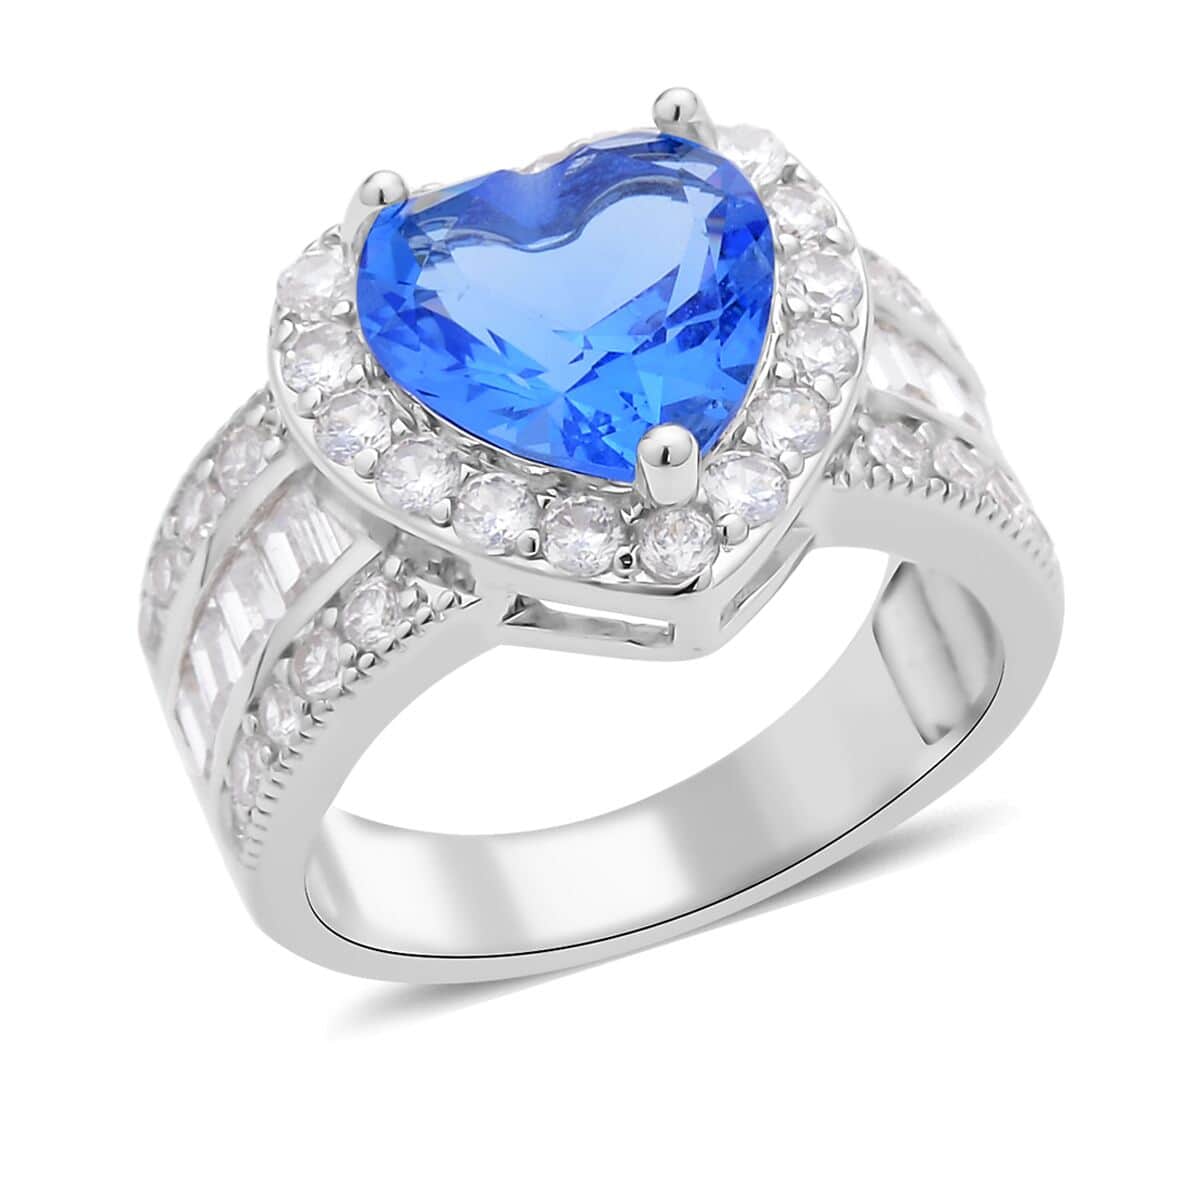 Buy Simulated Blue Sapphire and Simulated Diamond Heart Ring in